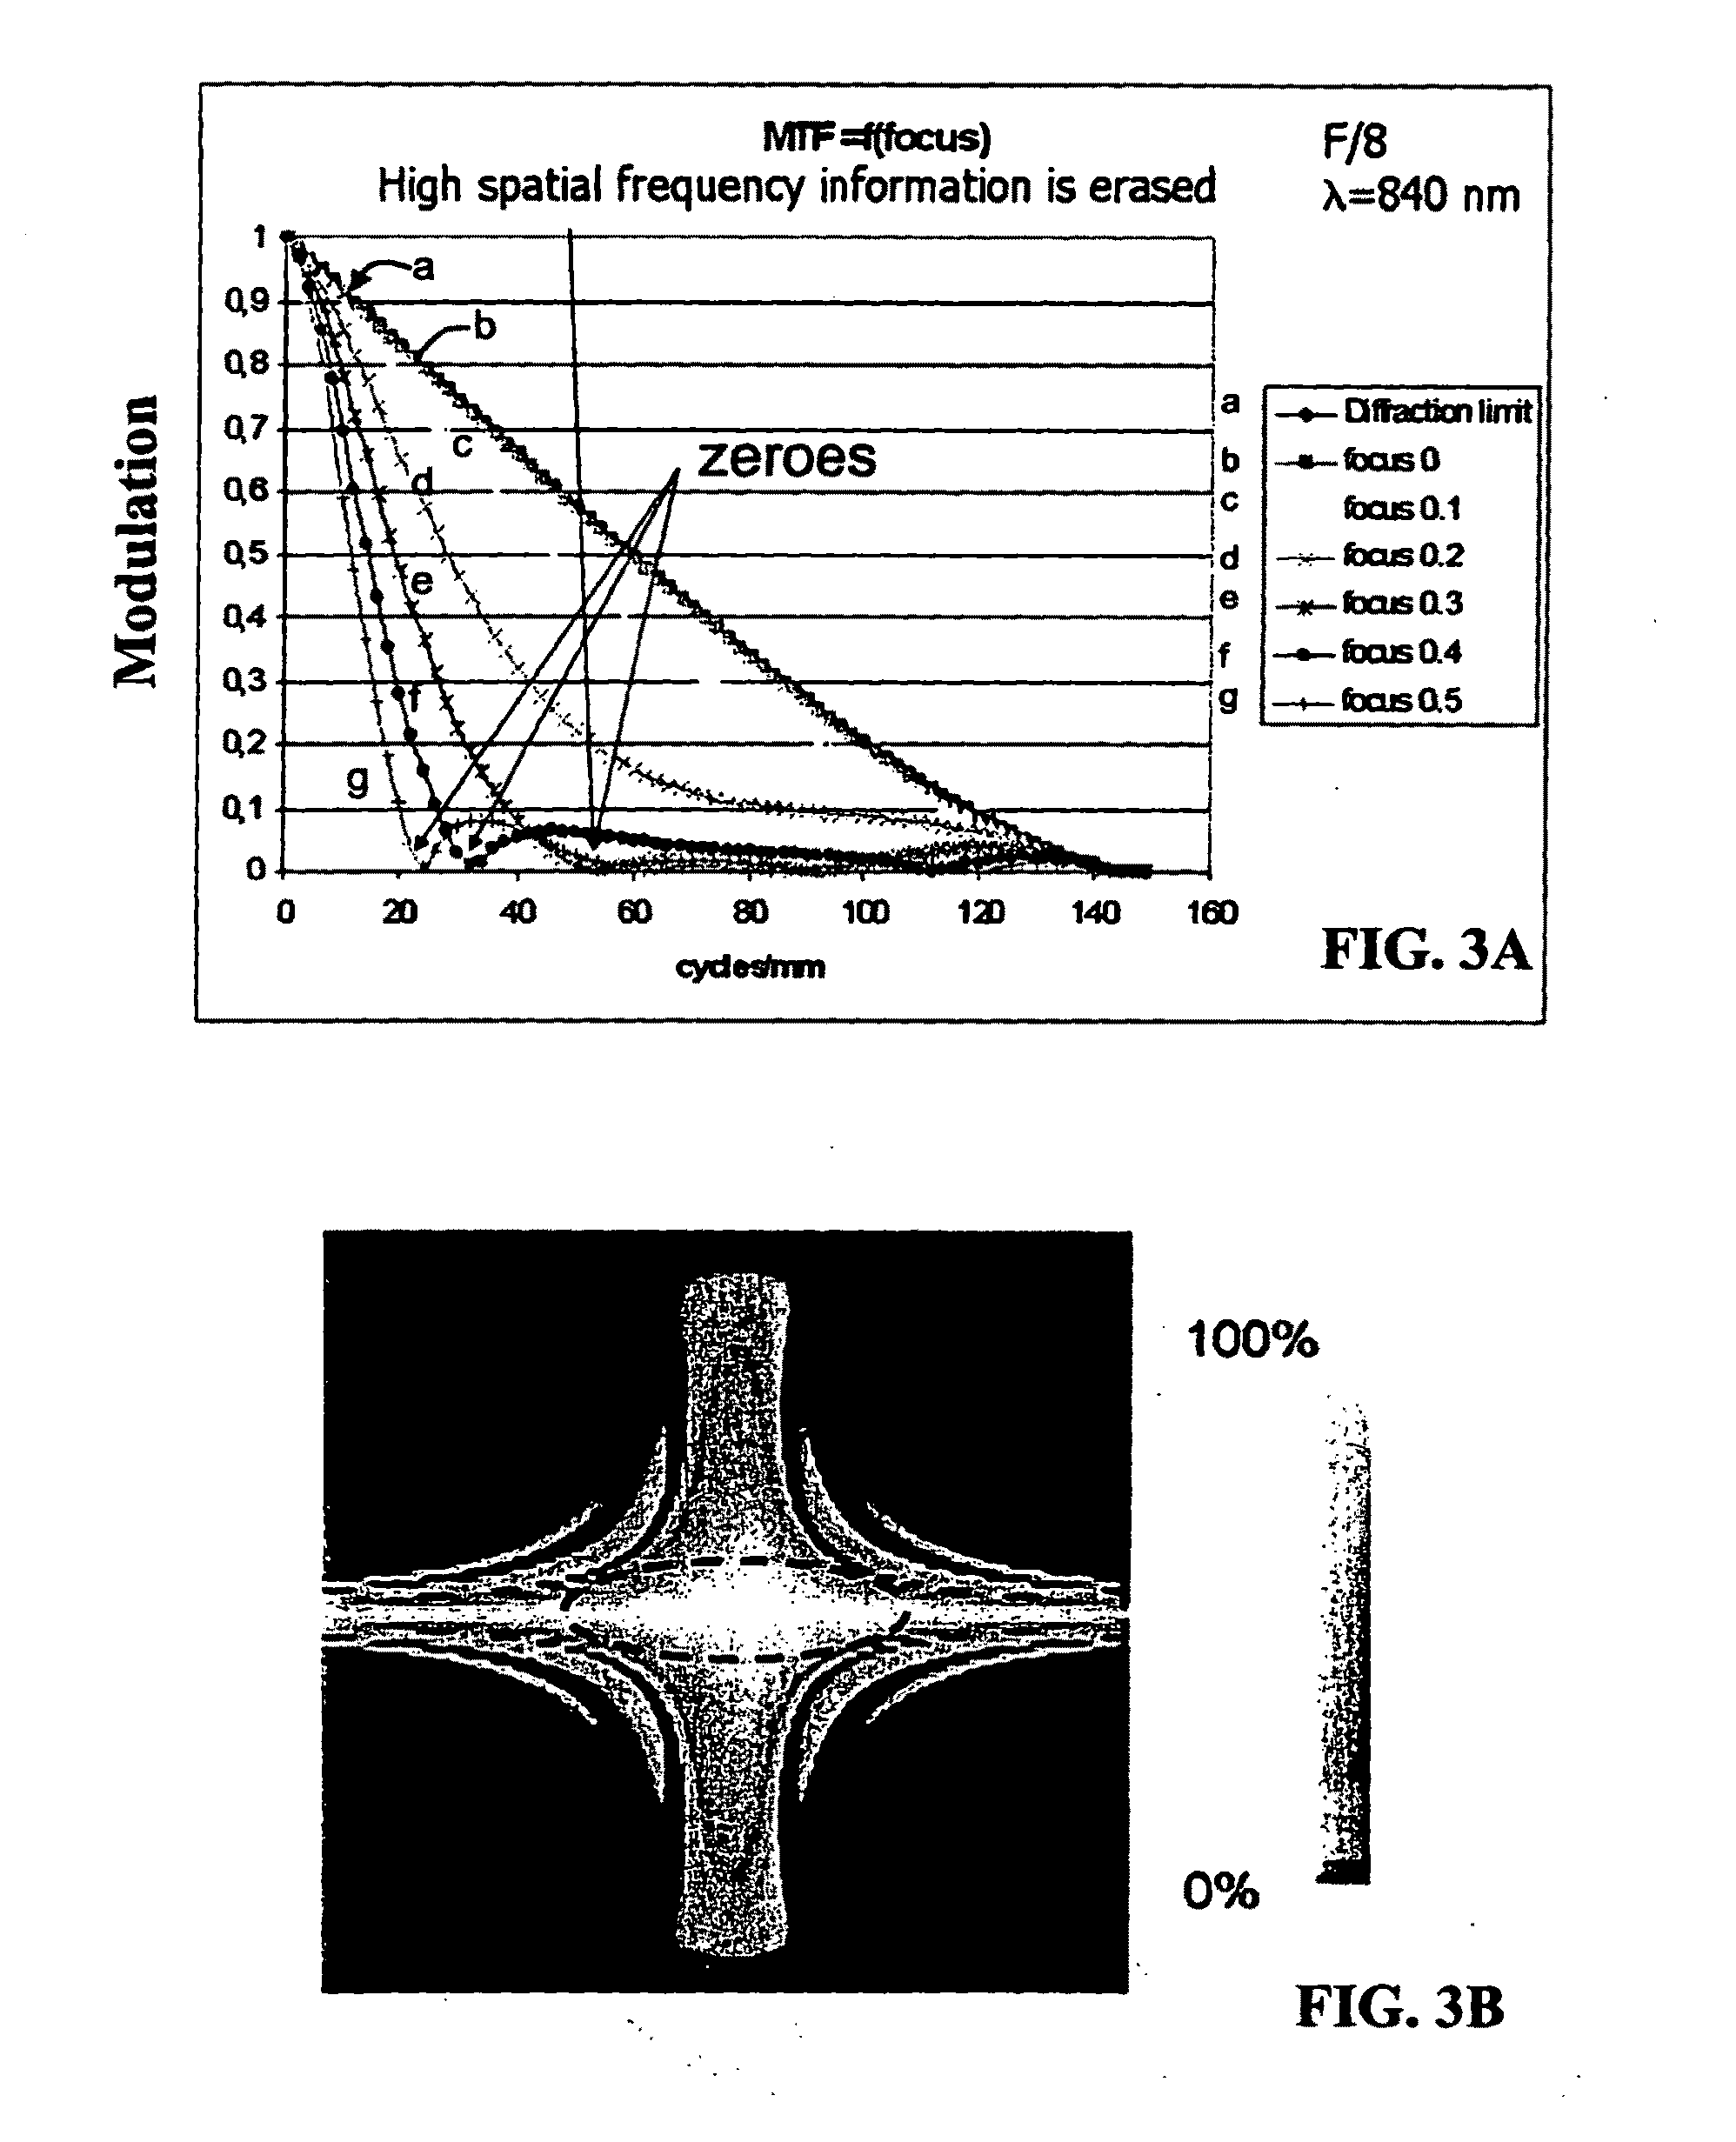 Large depth-of-field imaging system and iris recogniton system